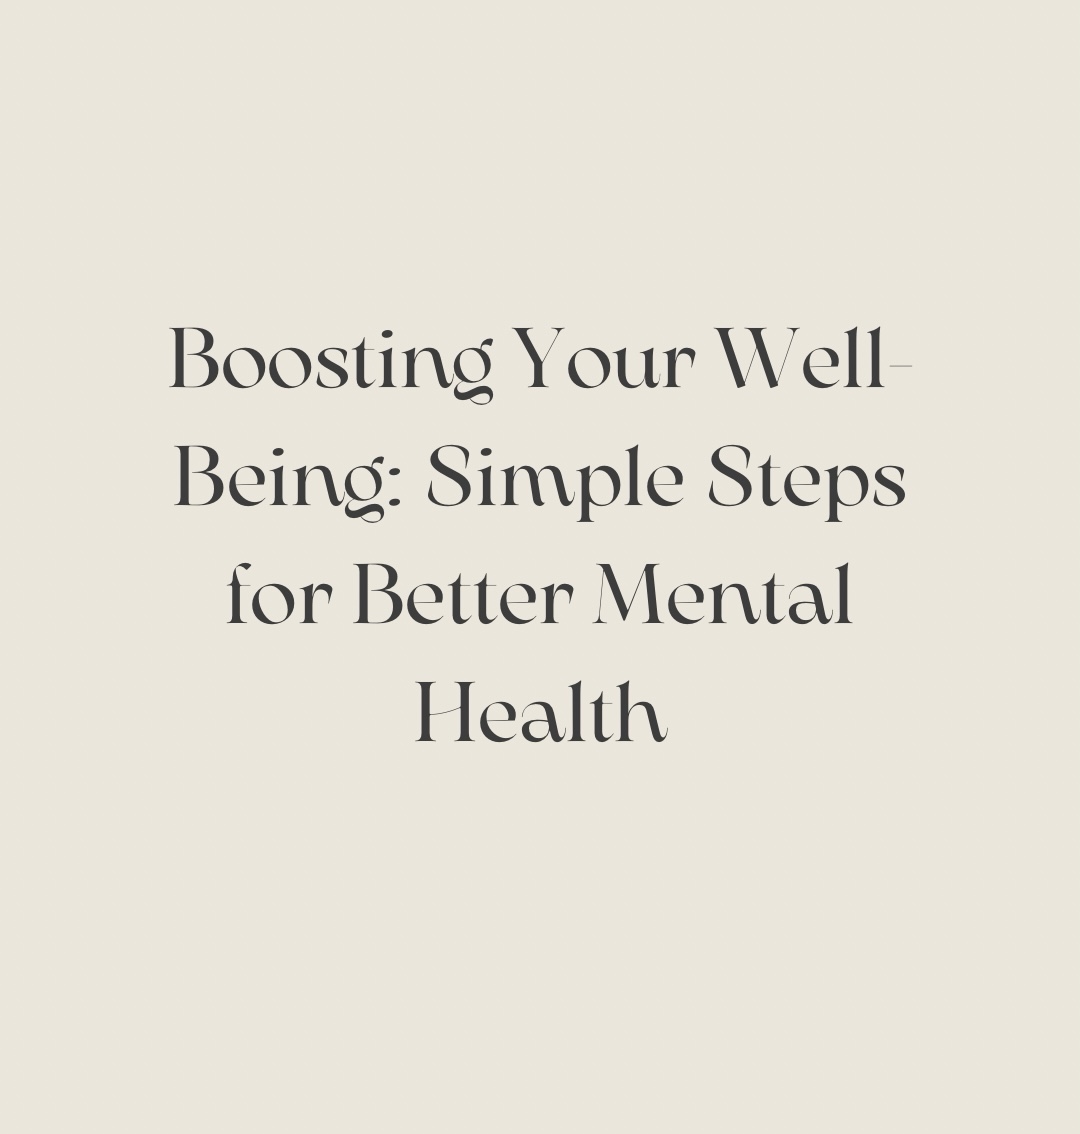 Boosting Your Well-Being: Simple Steps for Better Mental Health